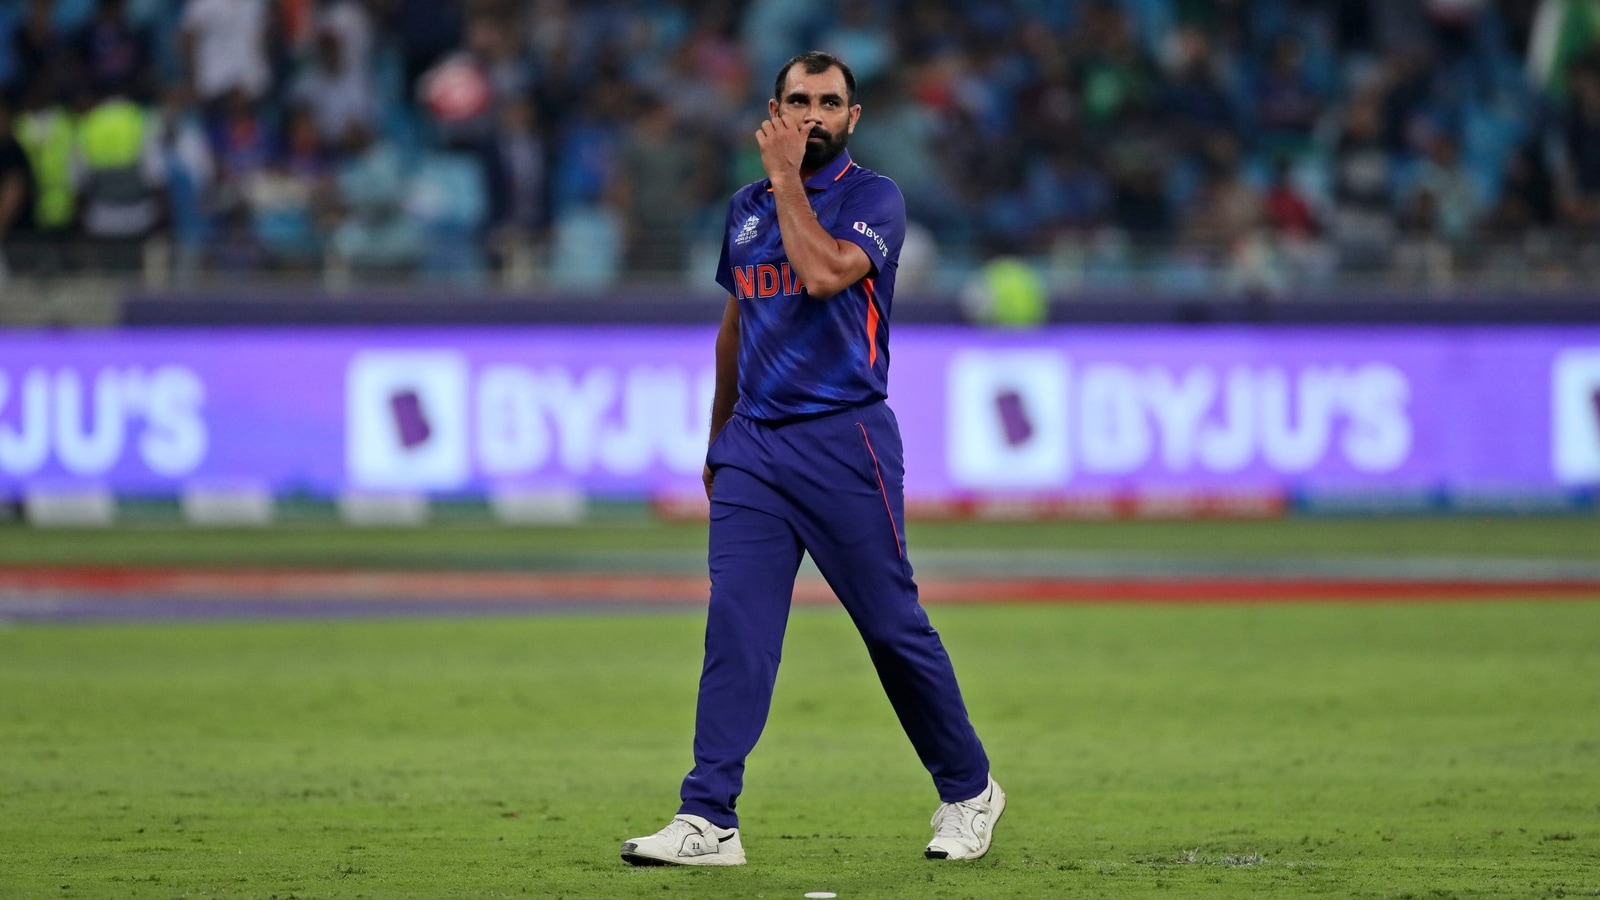 India Squad T20 WC: Mohammed Shami NOT in PLANS for T20s, Bhuvneshwar Kumar 'rested', BCCI to go for format-specific bowlers